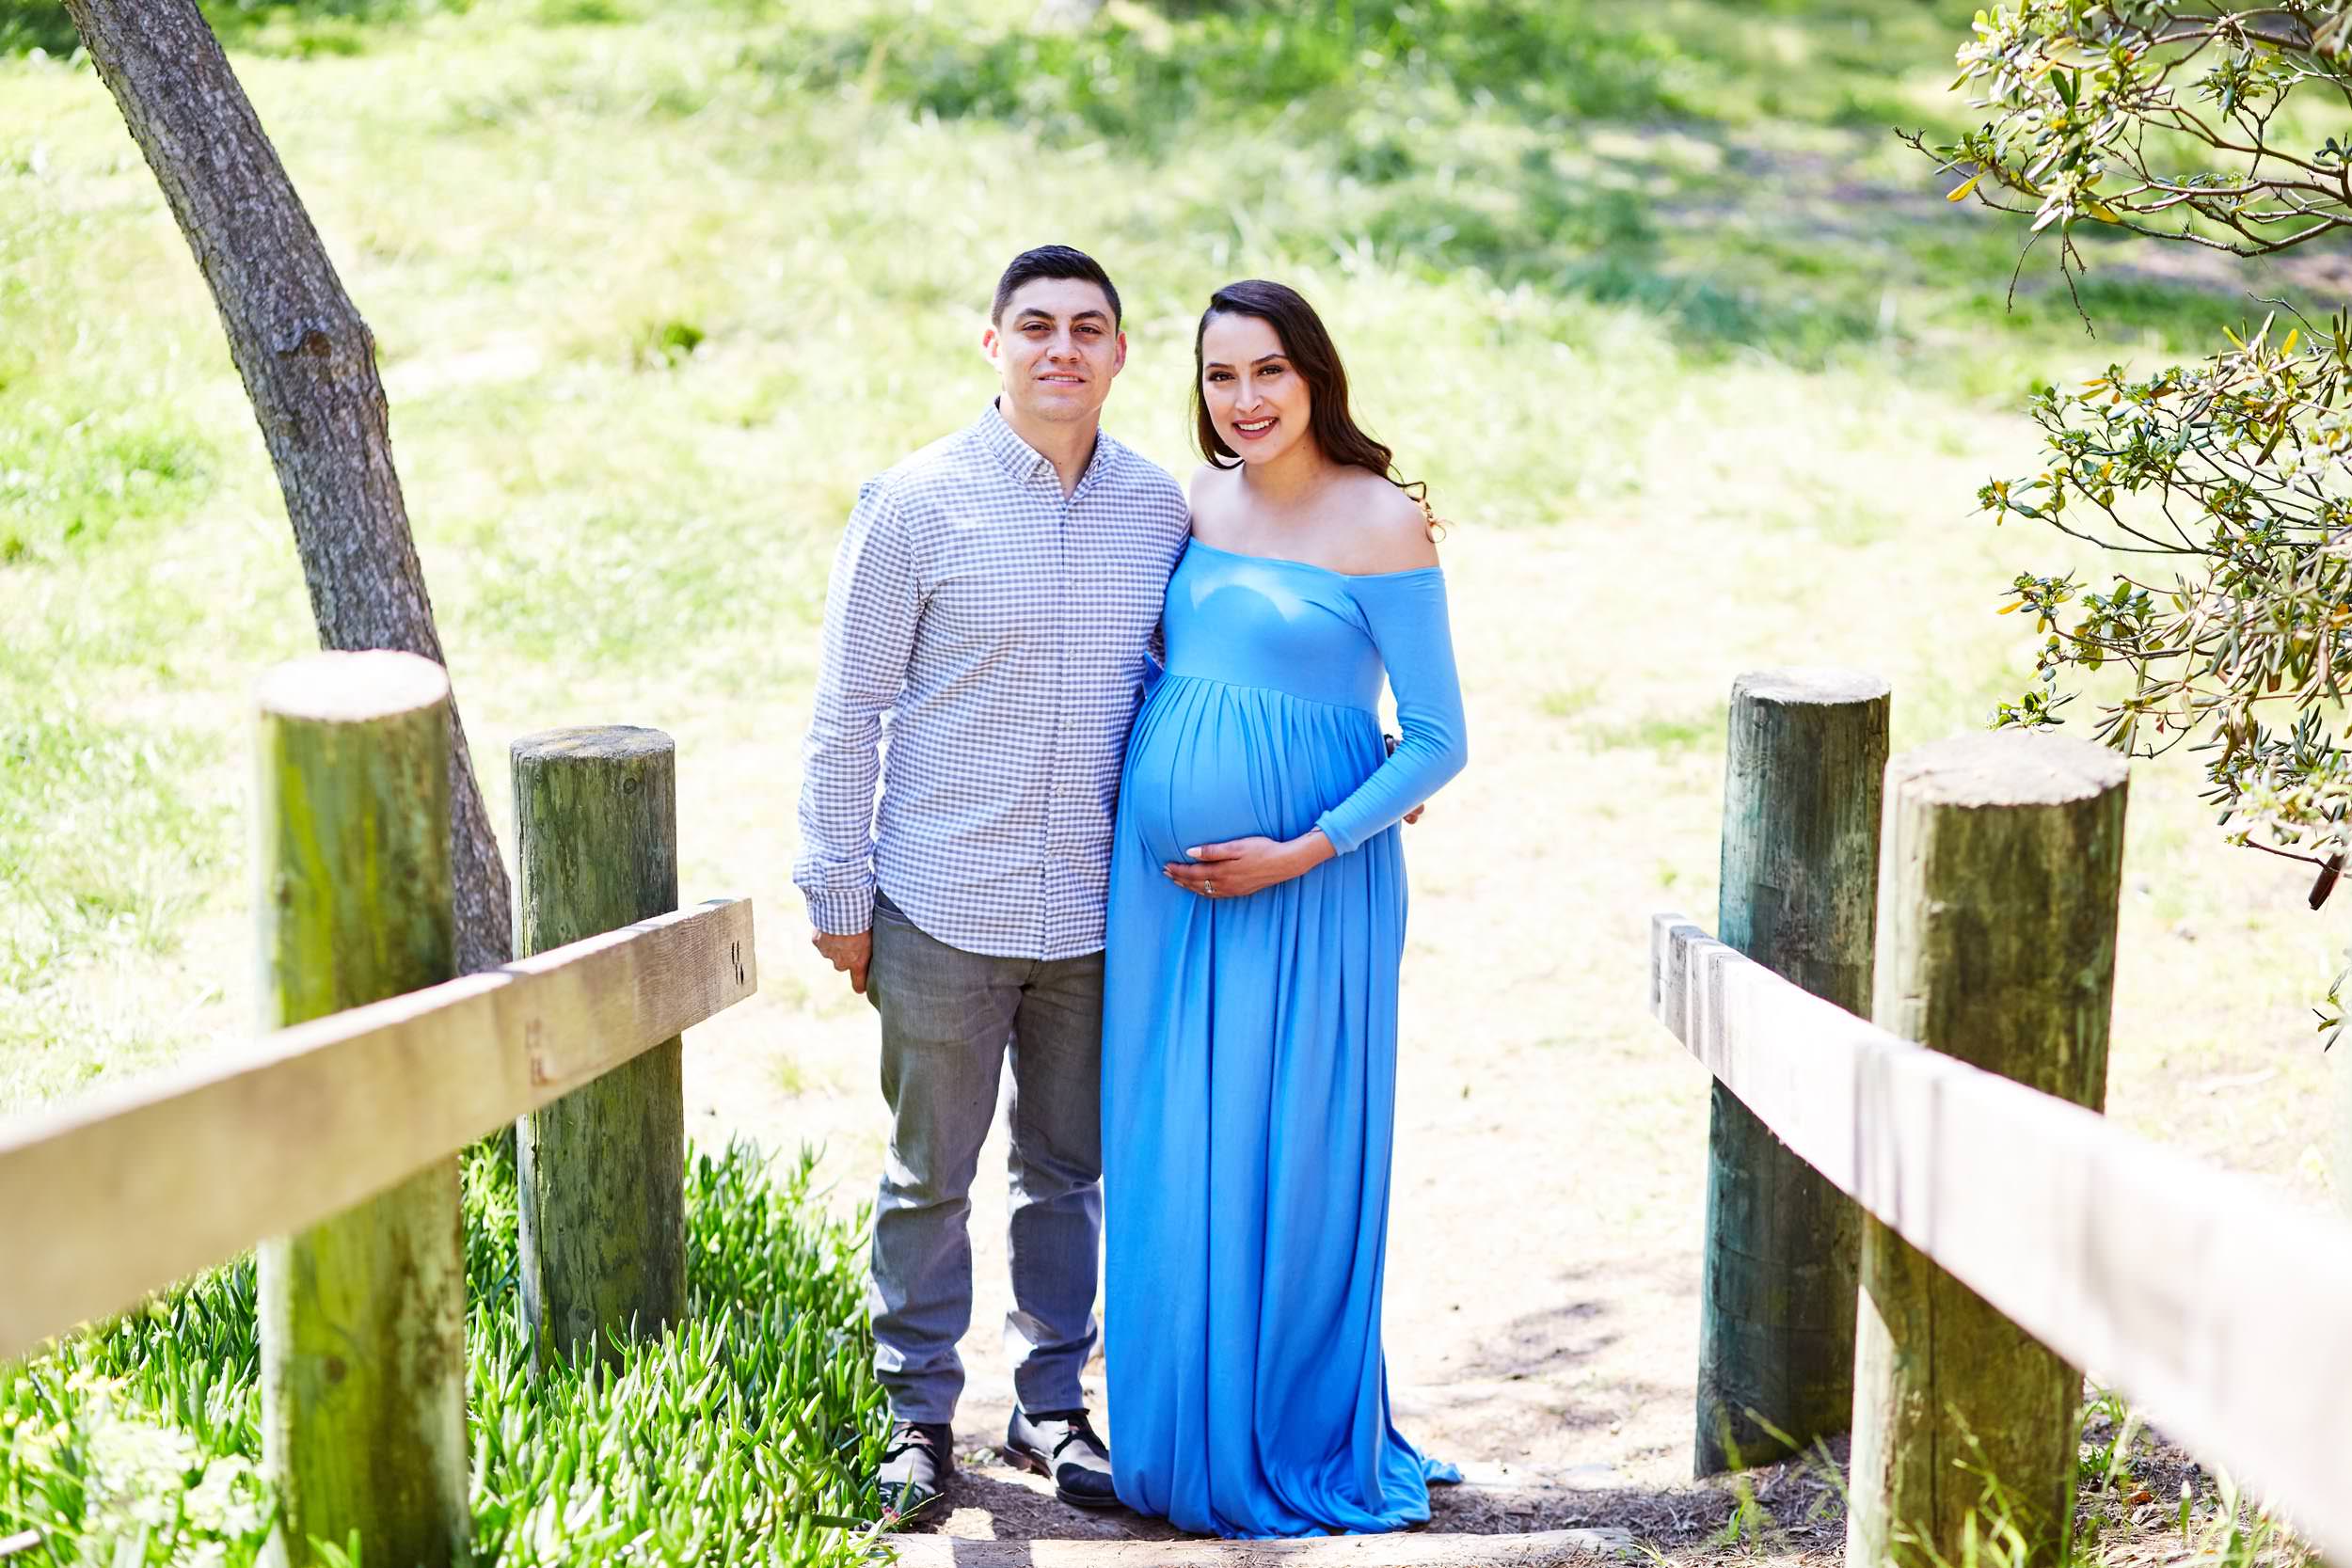  Wilderness Park Maternity Photography images from South Bay family and wedding portrait photography business Daniel Doty Photography. 